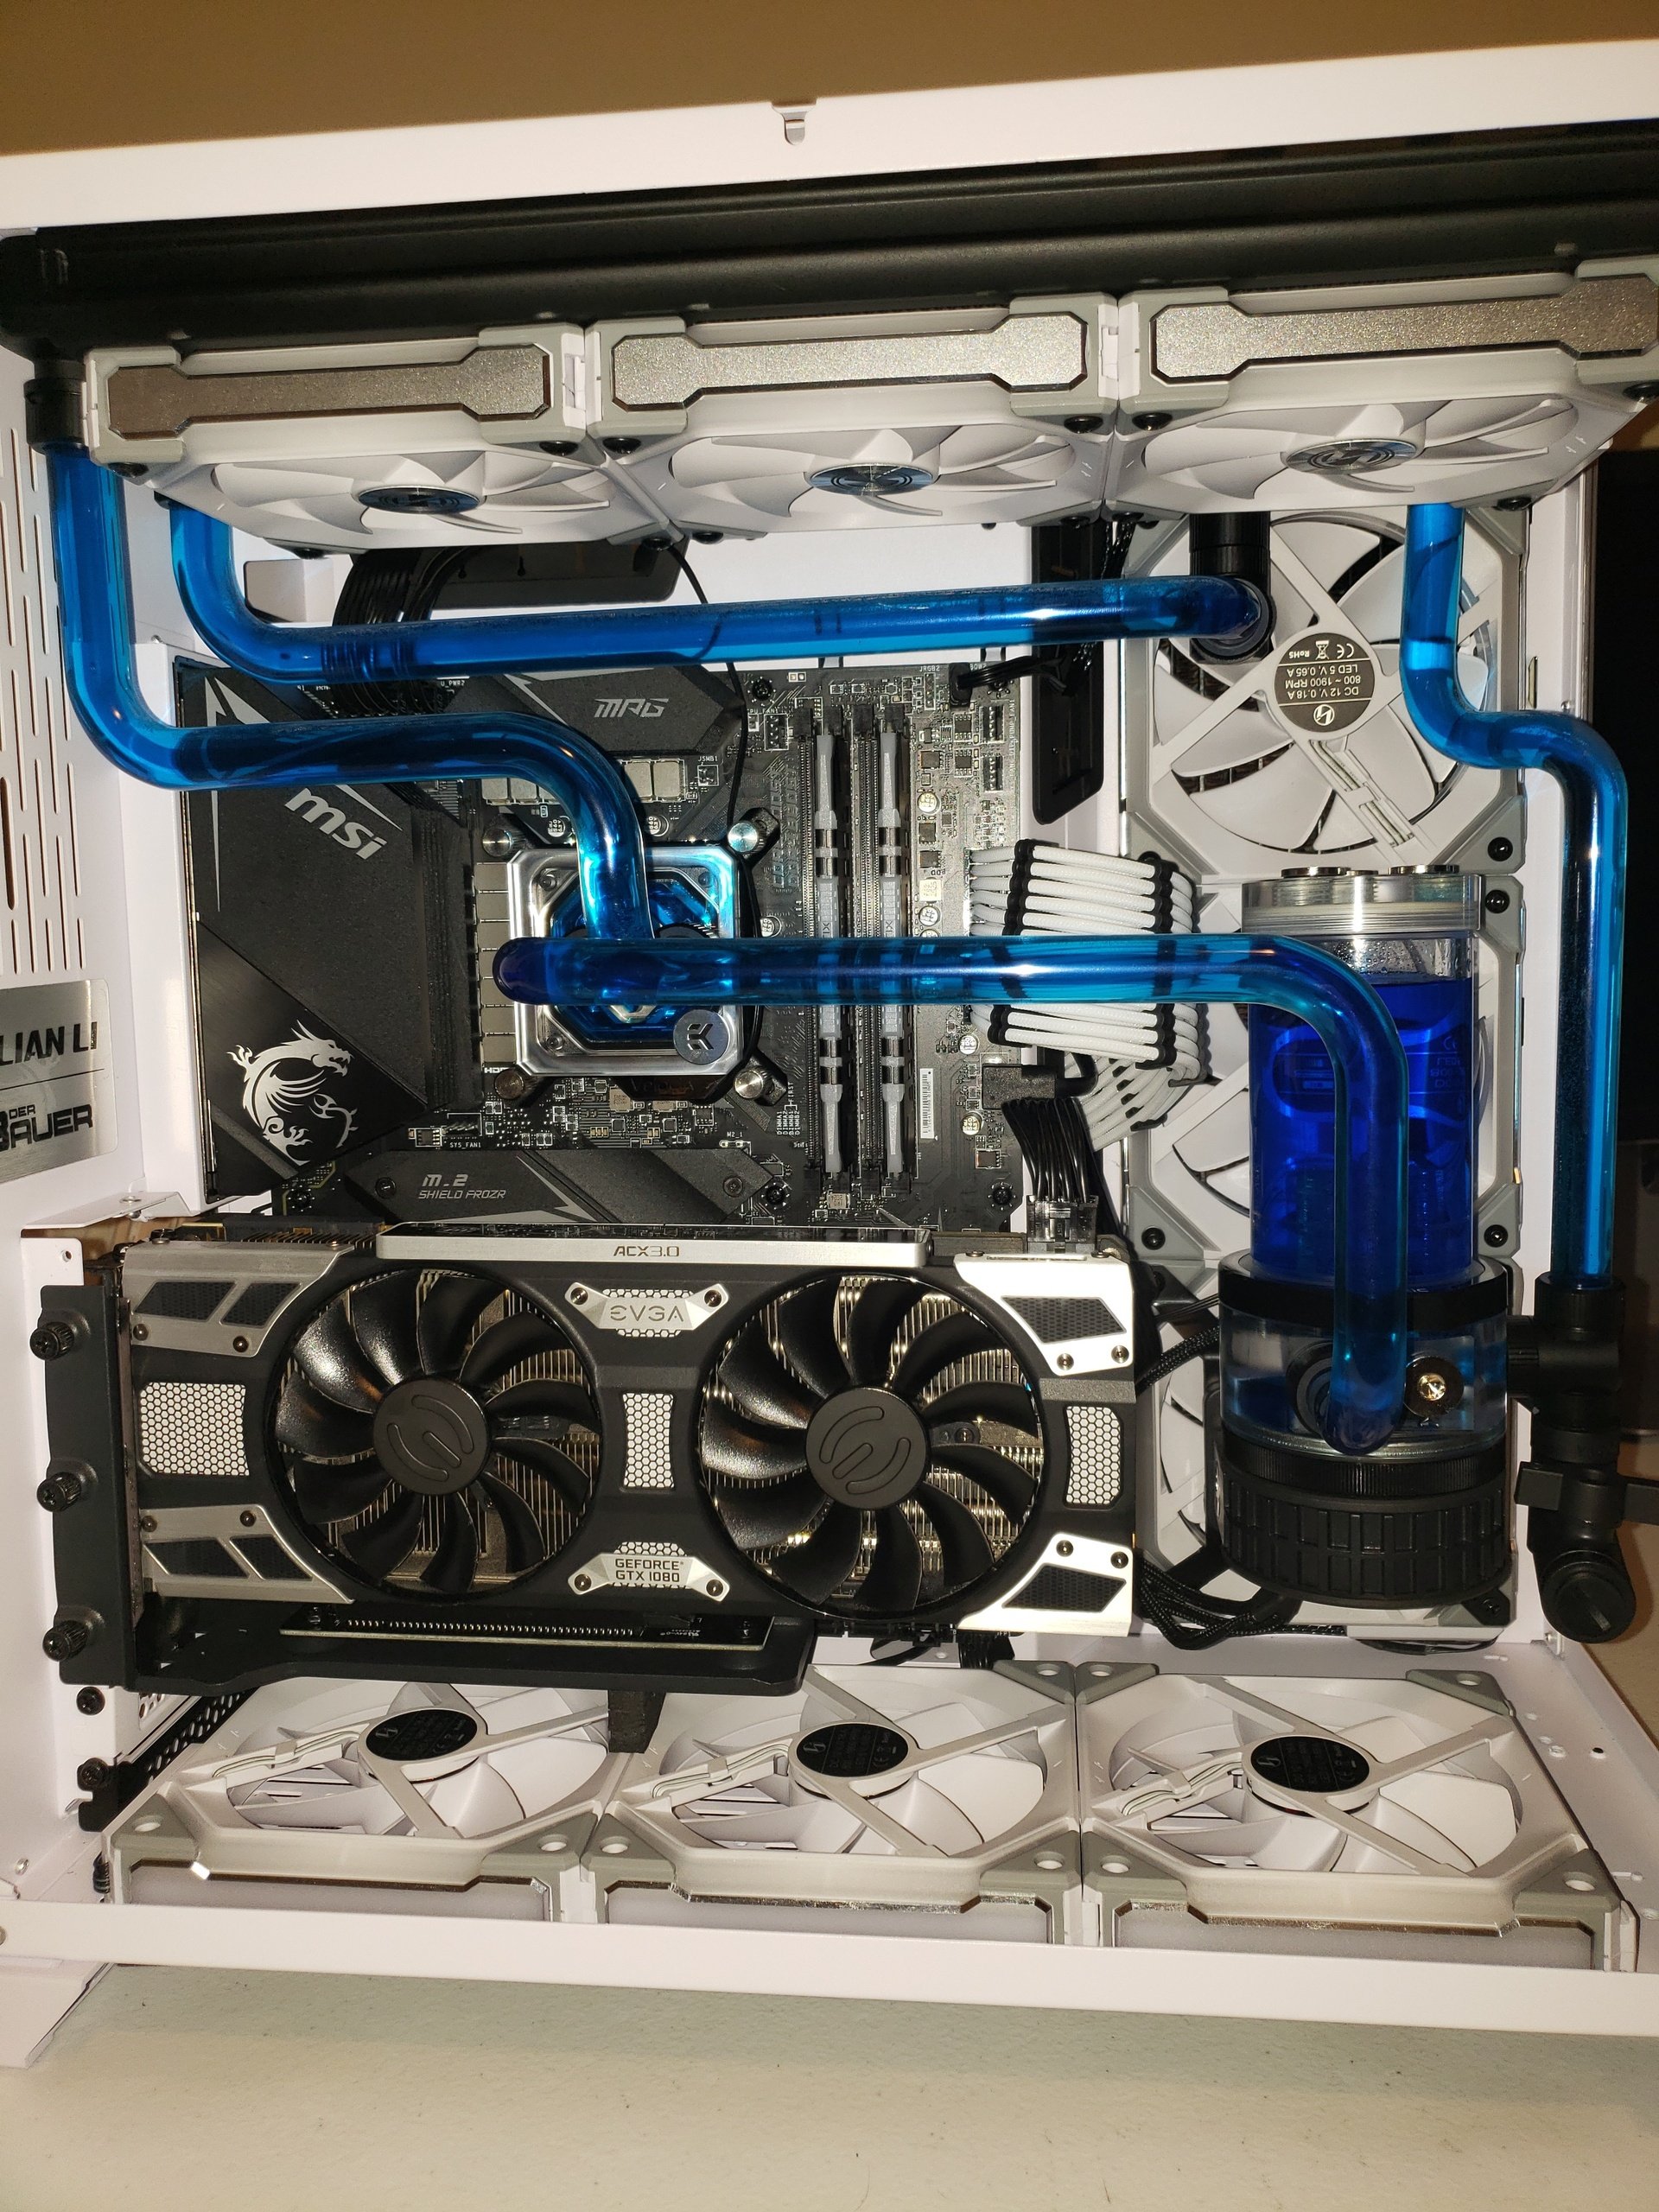 First loop - Another O11 Dynamic » builds.gg